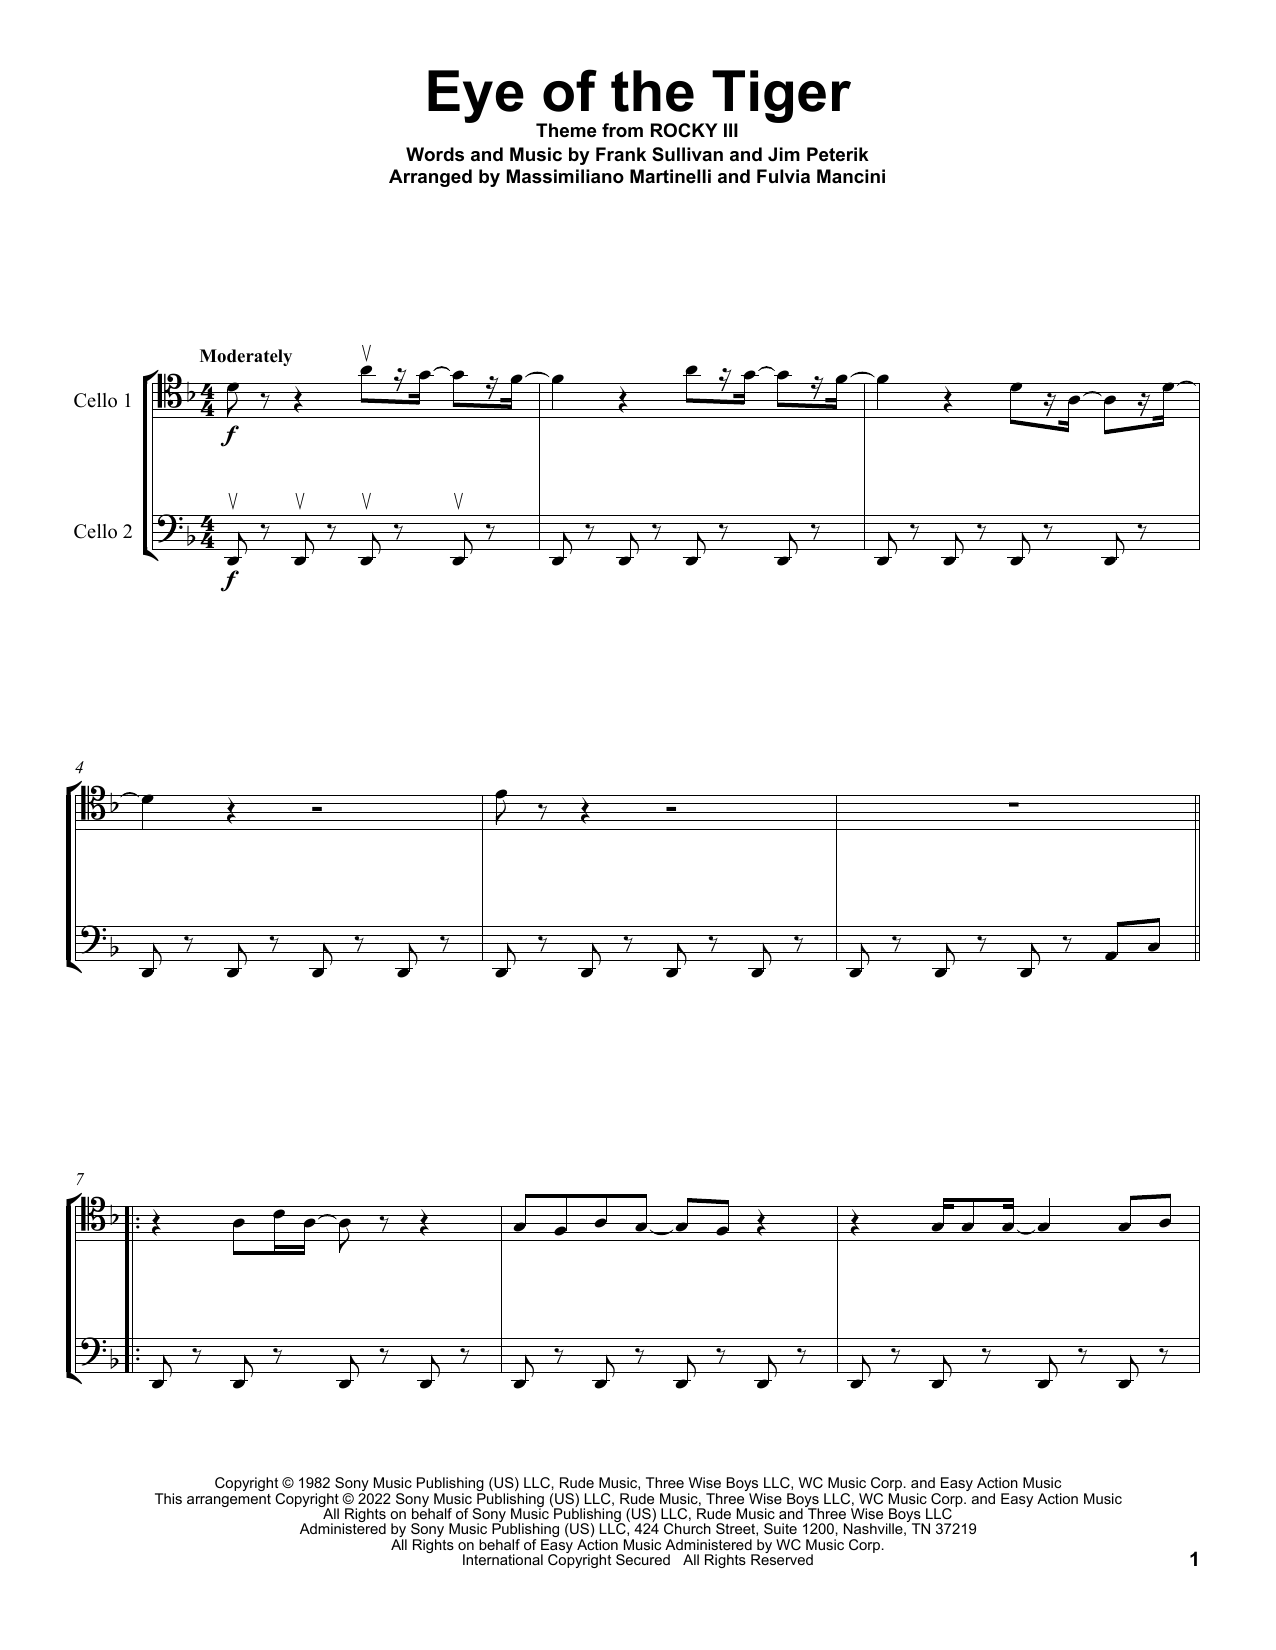 Download Mr & Mrs Cello Eye Of The Tiger Sheet Music